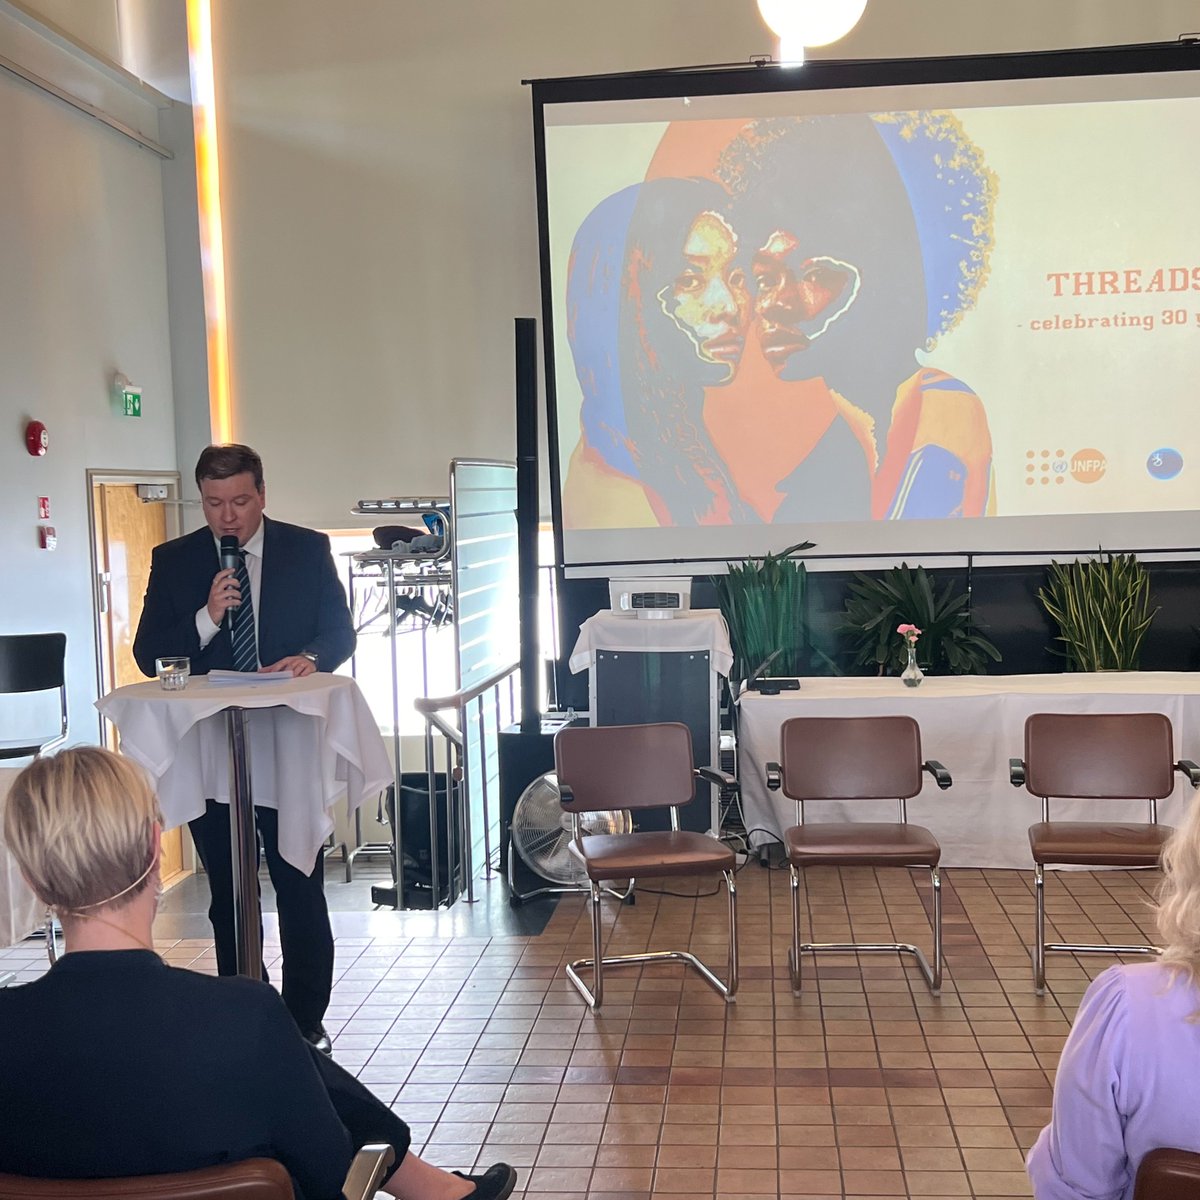 In his closing remarks at the launch of #ThreadsOfHope, Minister @VilleTavio highlighted that advancing gender equality & the rights of women and girls is at the heart of Finland's development policy. 

Together, we are ensuring rights & choices for all 🤝 #PartnersAtCore #ICPD30